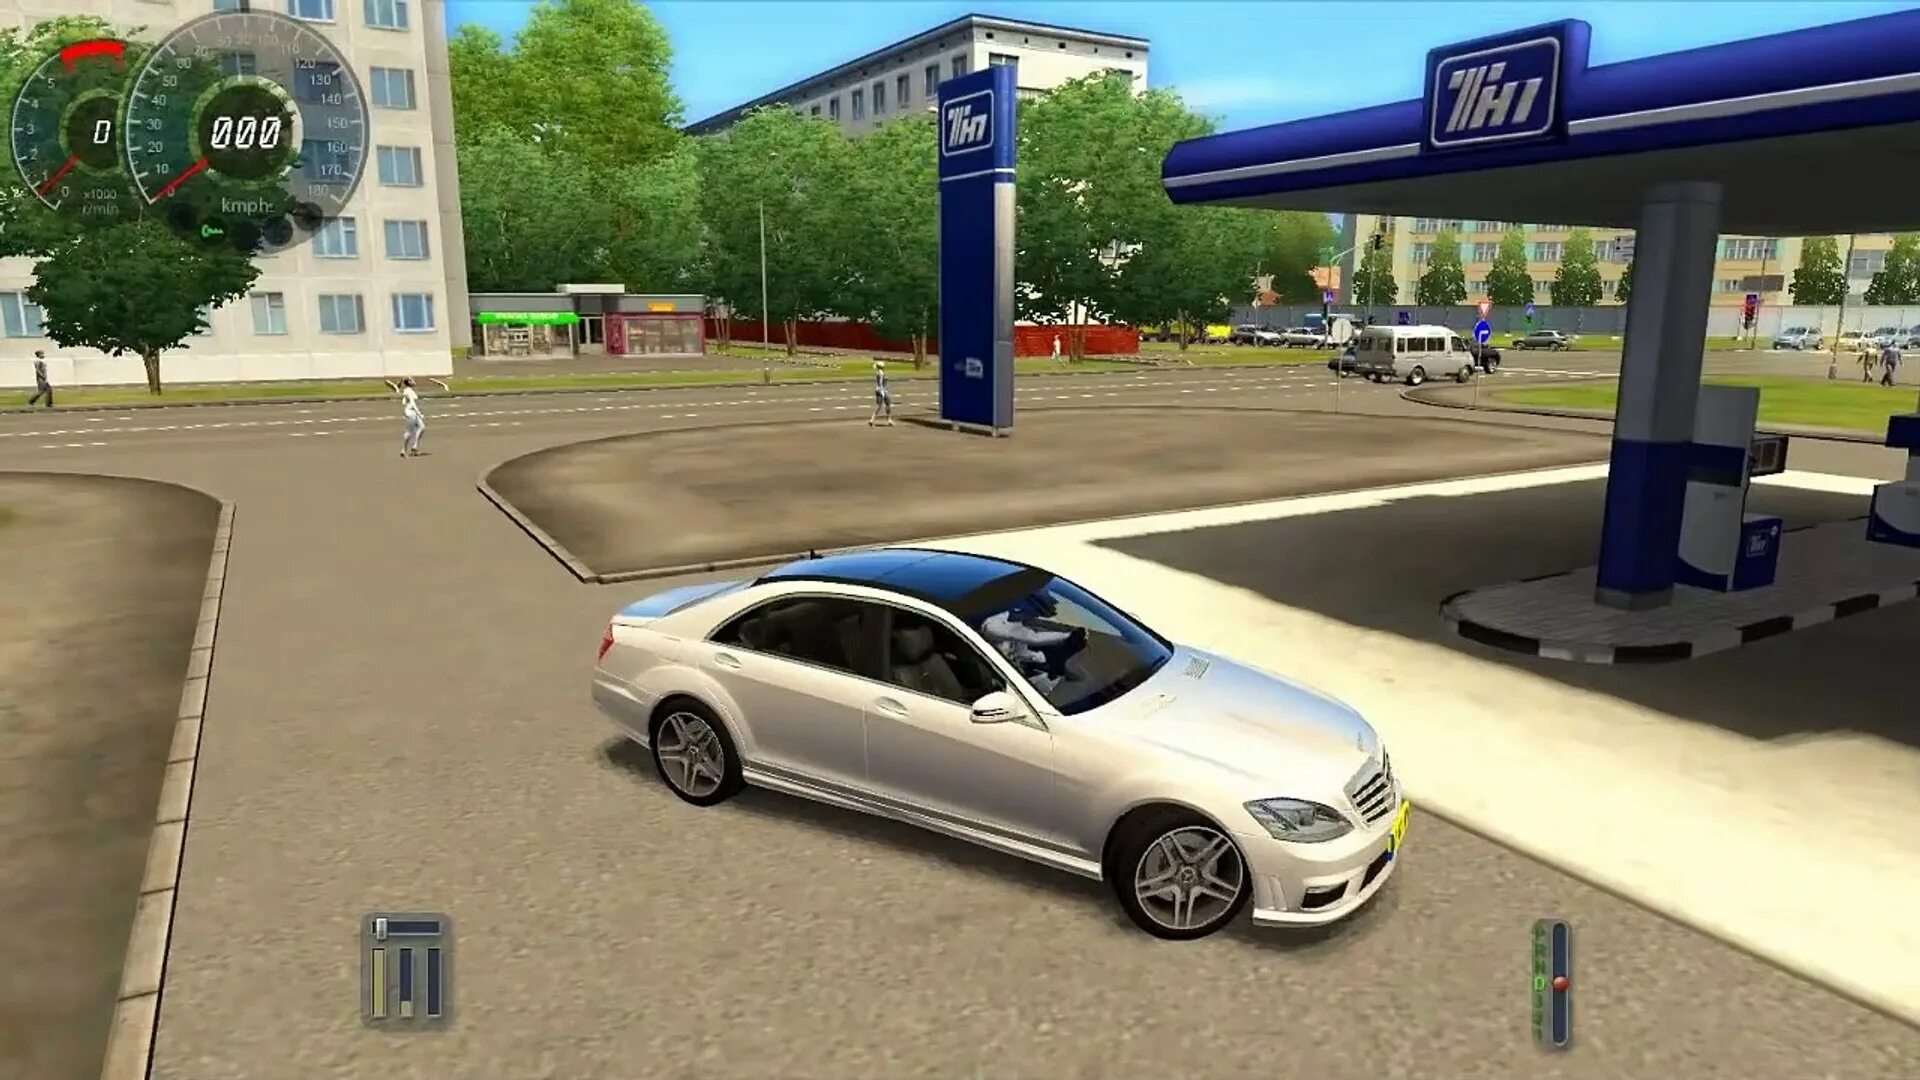 City car games. City car Driving Mercedes. City car Driving 2007 г.. Диск Сити кар драйвинг. City car Driving 1.3.1.